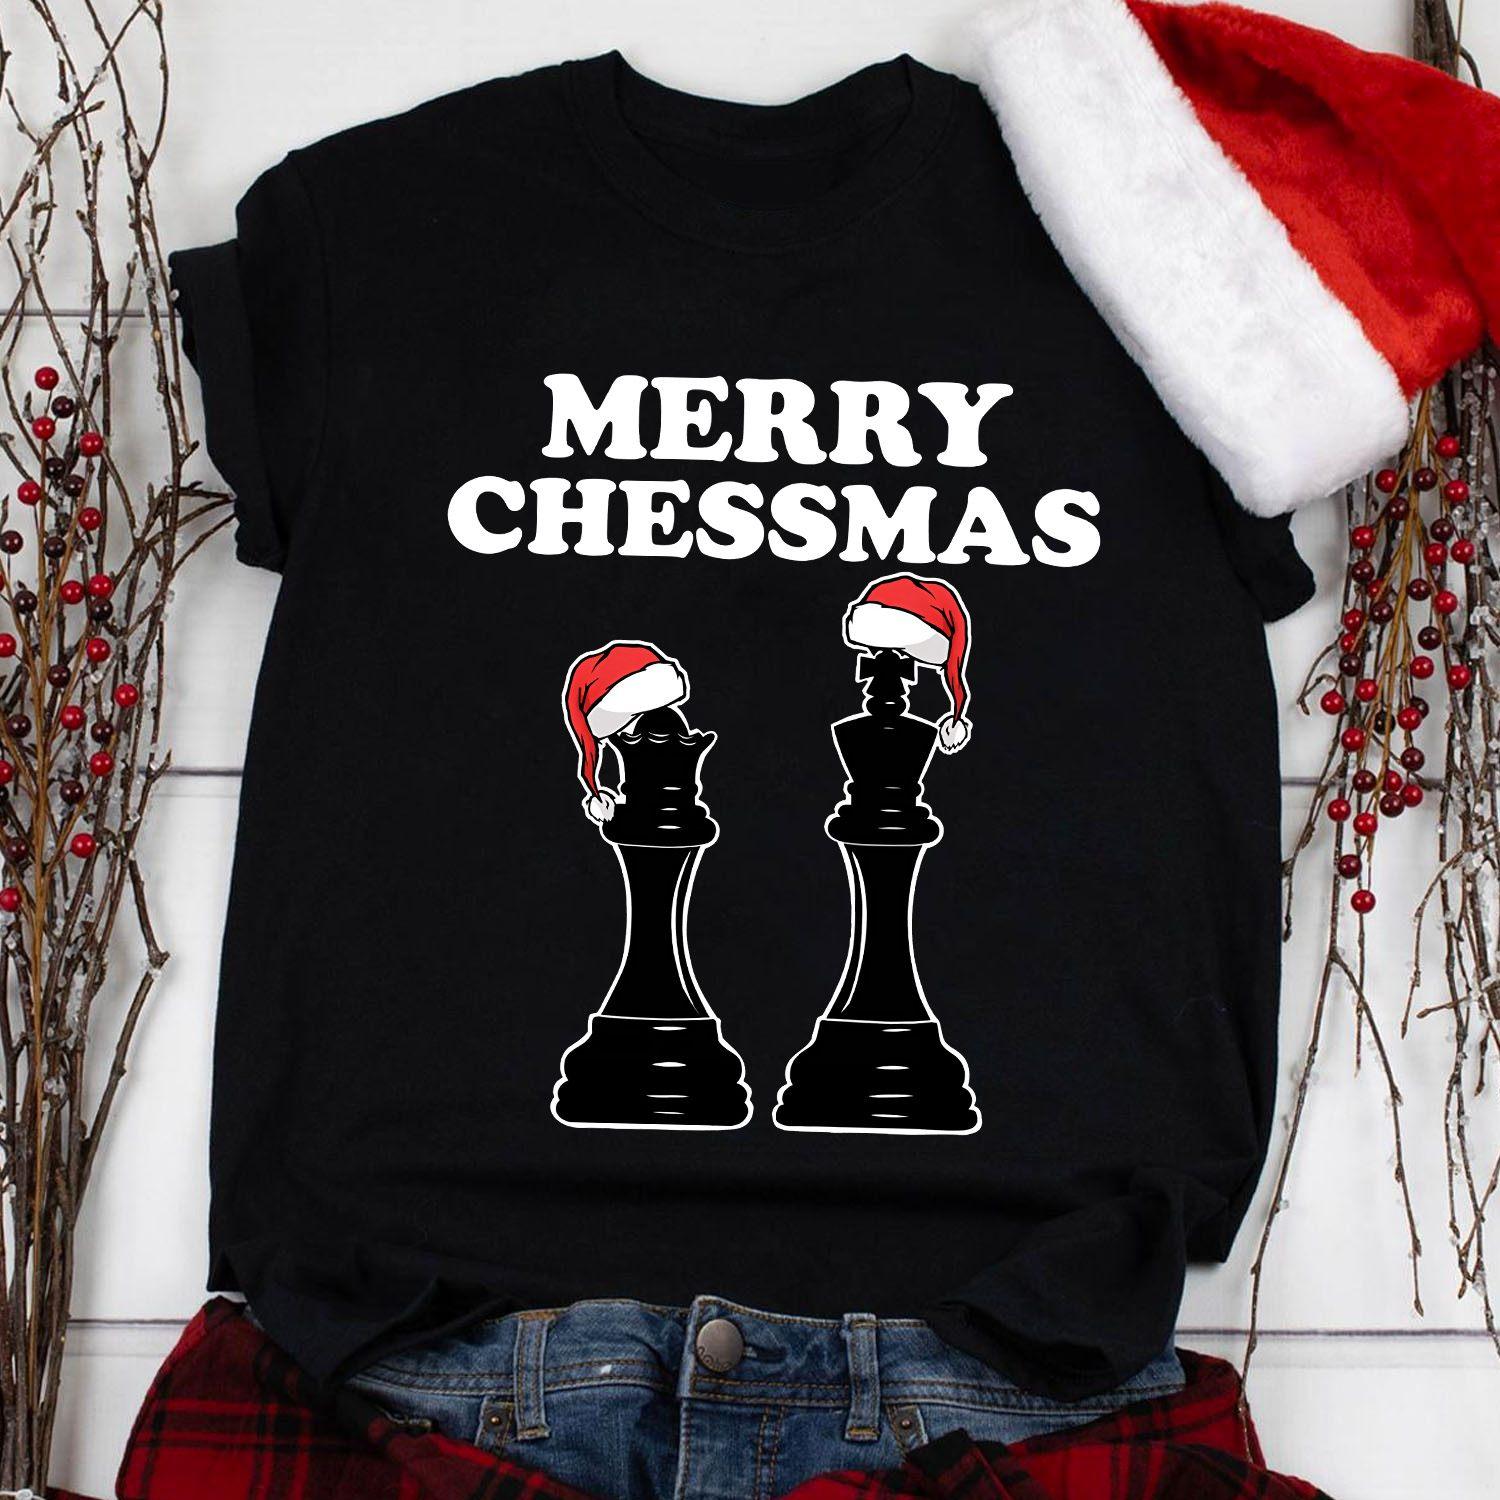 Merry Chessmas - Christmas day ugly sweater, love playing chess